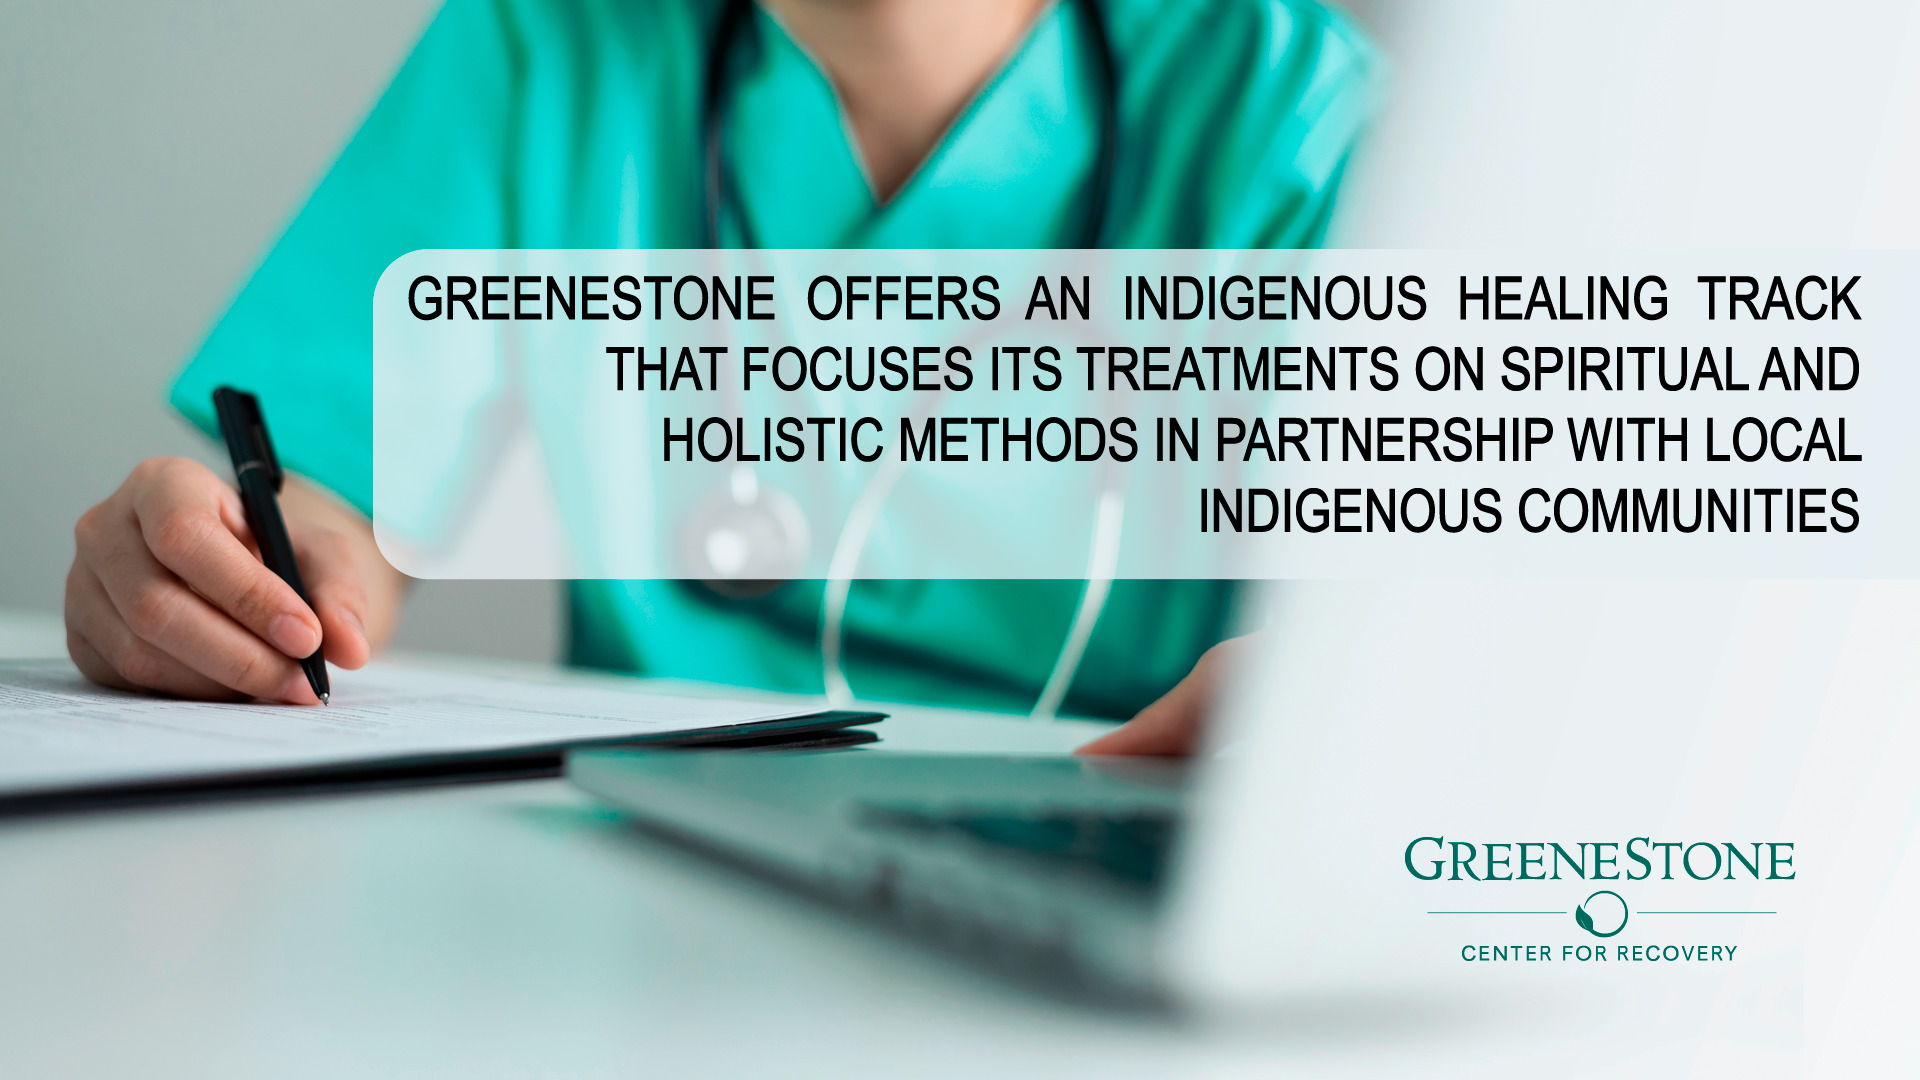 GreeneStone offers an indigenous healing track that focuses its treatments on spiritual and holistic methods in partnership with local indigenous communities.